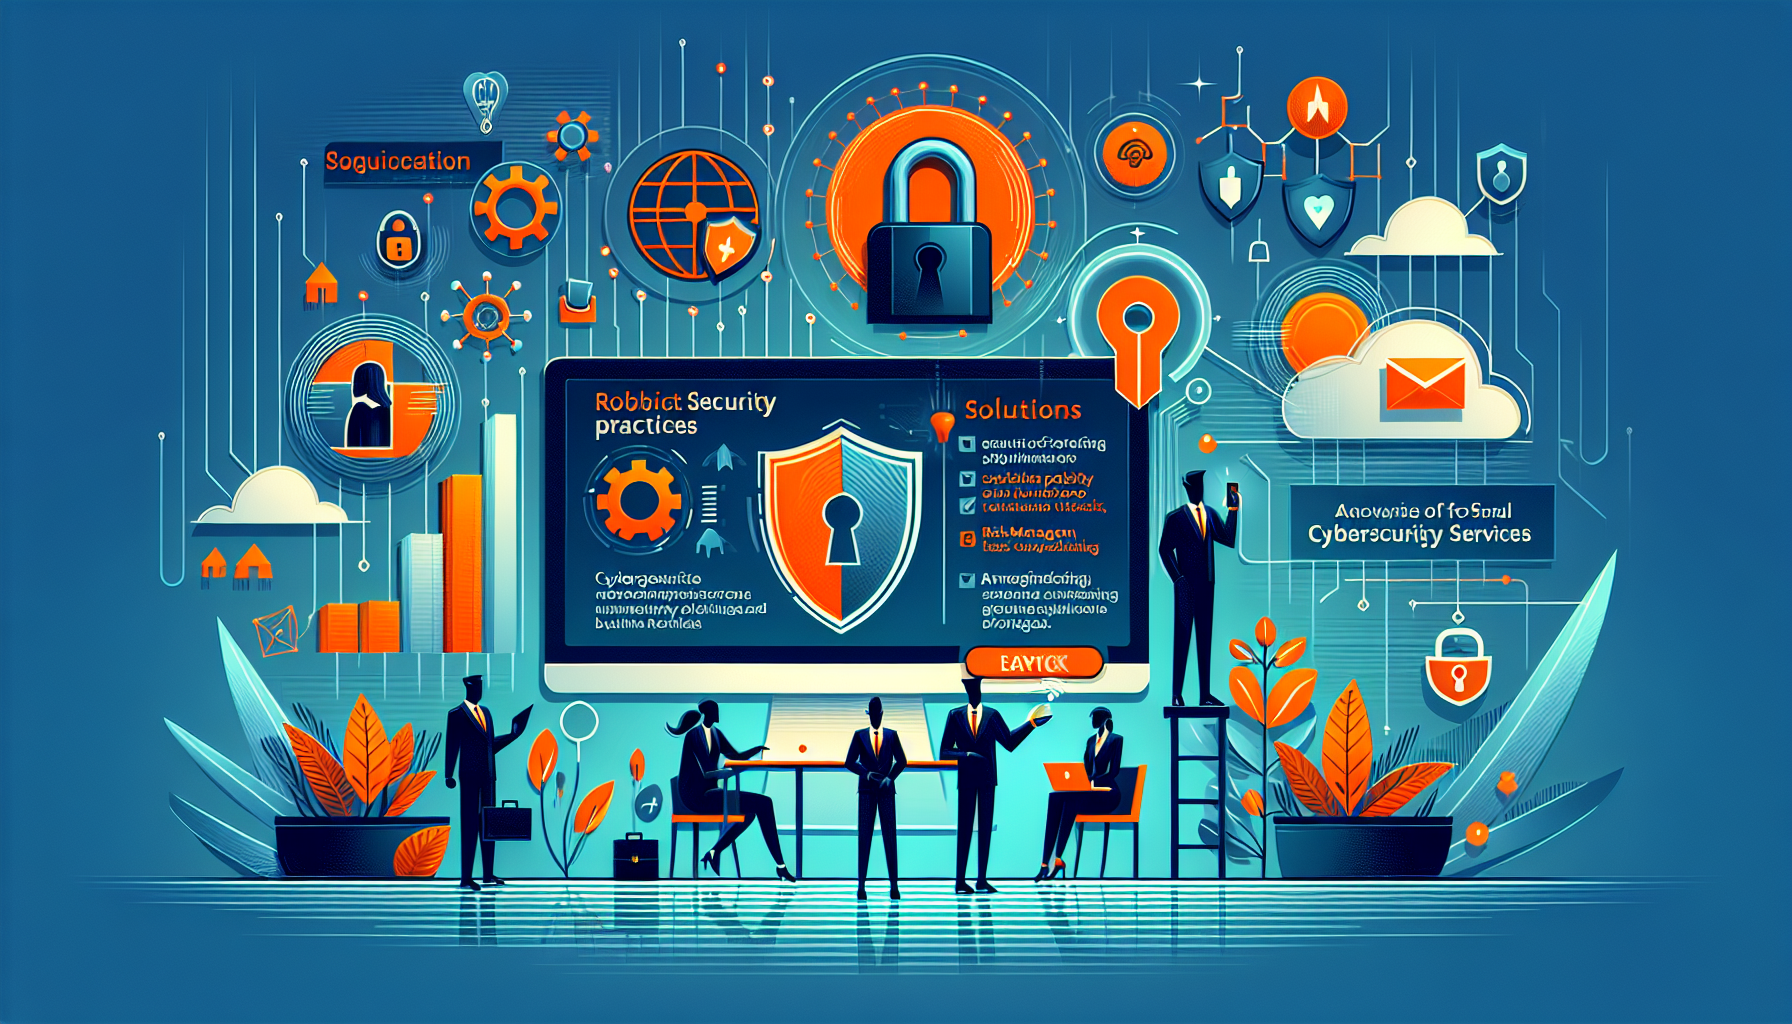 Create a modern and vibrant illustration embodying the themes of cybersecurity in the context of small and medium-sized businesses and non-profits. The image should depict engaging scenarios that resonate with the themes of robust security practices, navigating online threats, and solutions safeguarding organizations. Make use of three key style elements: sophistication, approachability, and emphasis on visual storytelling. The viewer should feel like a decision-maker evaluating their cybersecurity approach, invoking a sense of trust and expertise. Make sure to align the illustration with topics such as cybersecurity policy creation, risk management, and advantages of professional cybersecurity services. Use bold colors and clean lines for a contemporary touch to increase visual appeal.